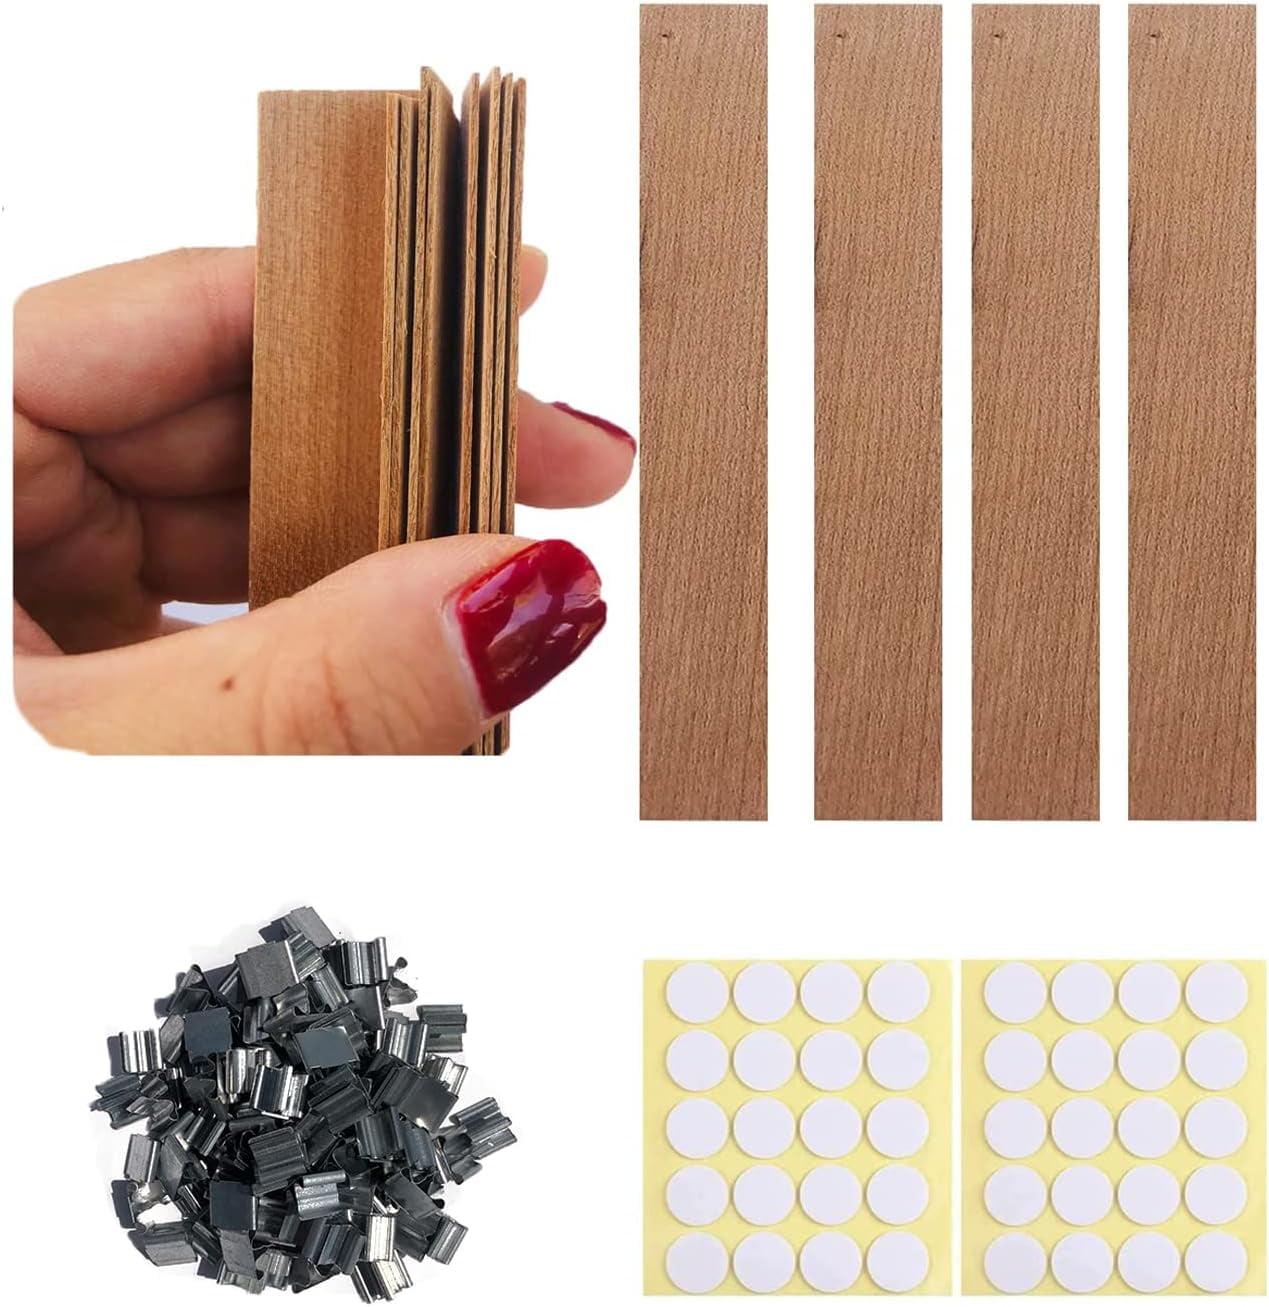 150PCS Candle Wick Holders for Candle Making Candle Wick Holder Wick  Centering Tool for Candle Making Wick Setter Tool